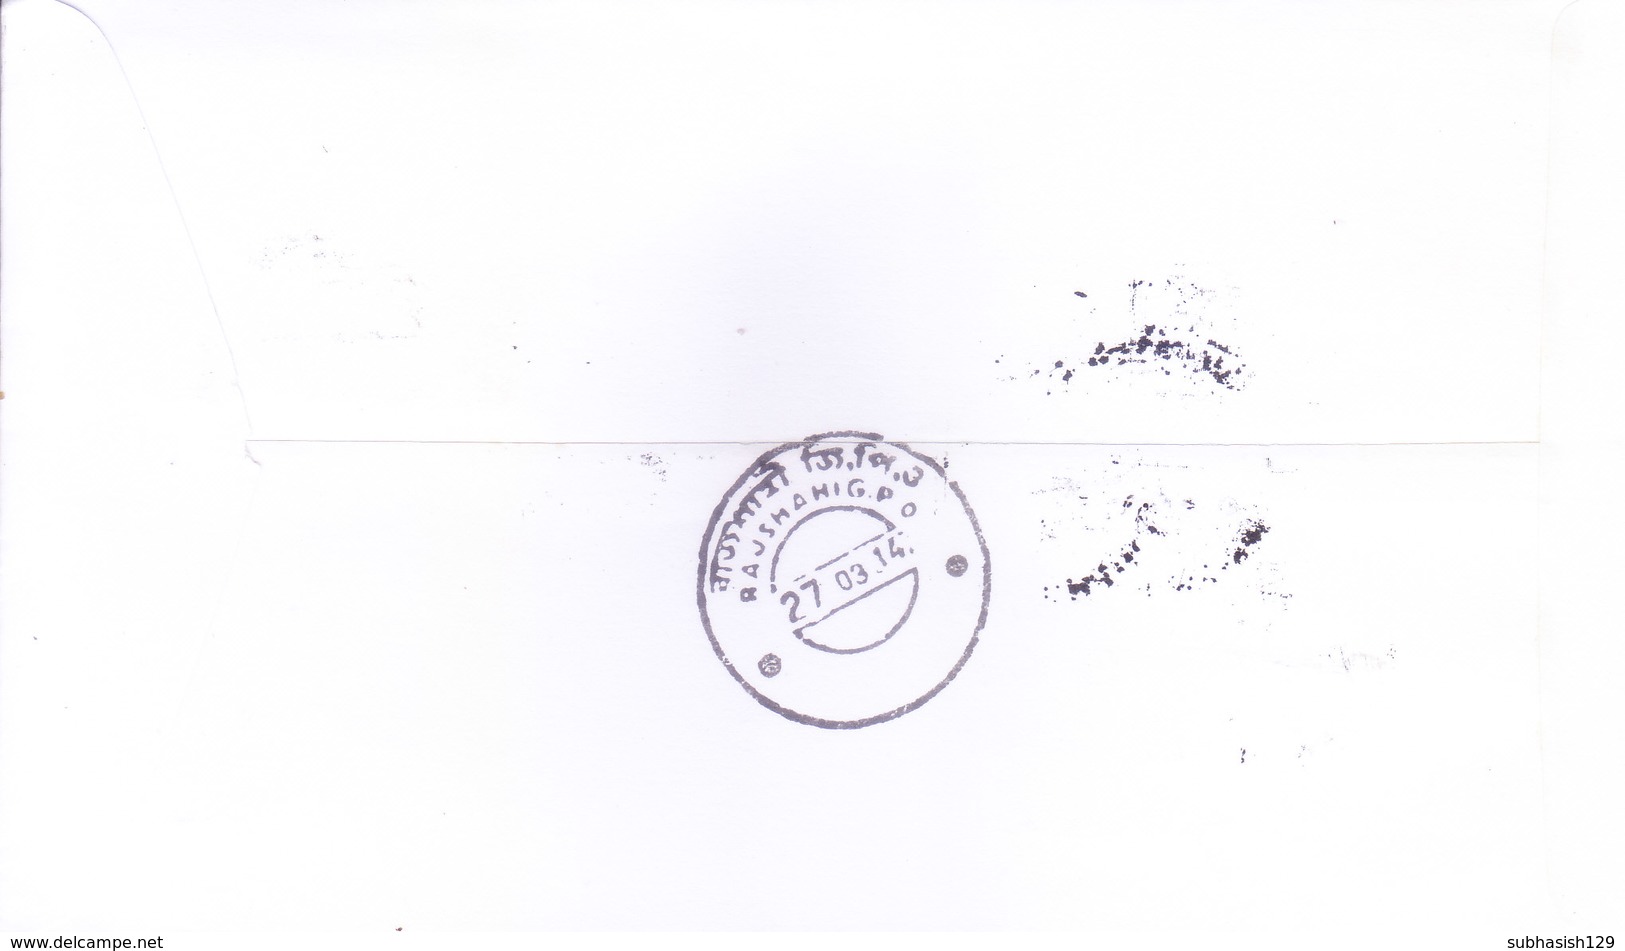 BHUTAN : COMMERCIAL COVER : POSTED FROM THIMPHU FOR BANGLADESH : USE OF 3D STAMP, WILD ANIMAL, YAK - Bhutan